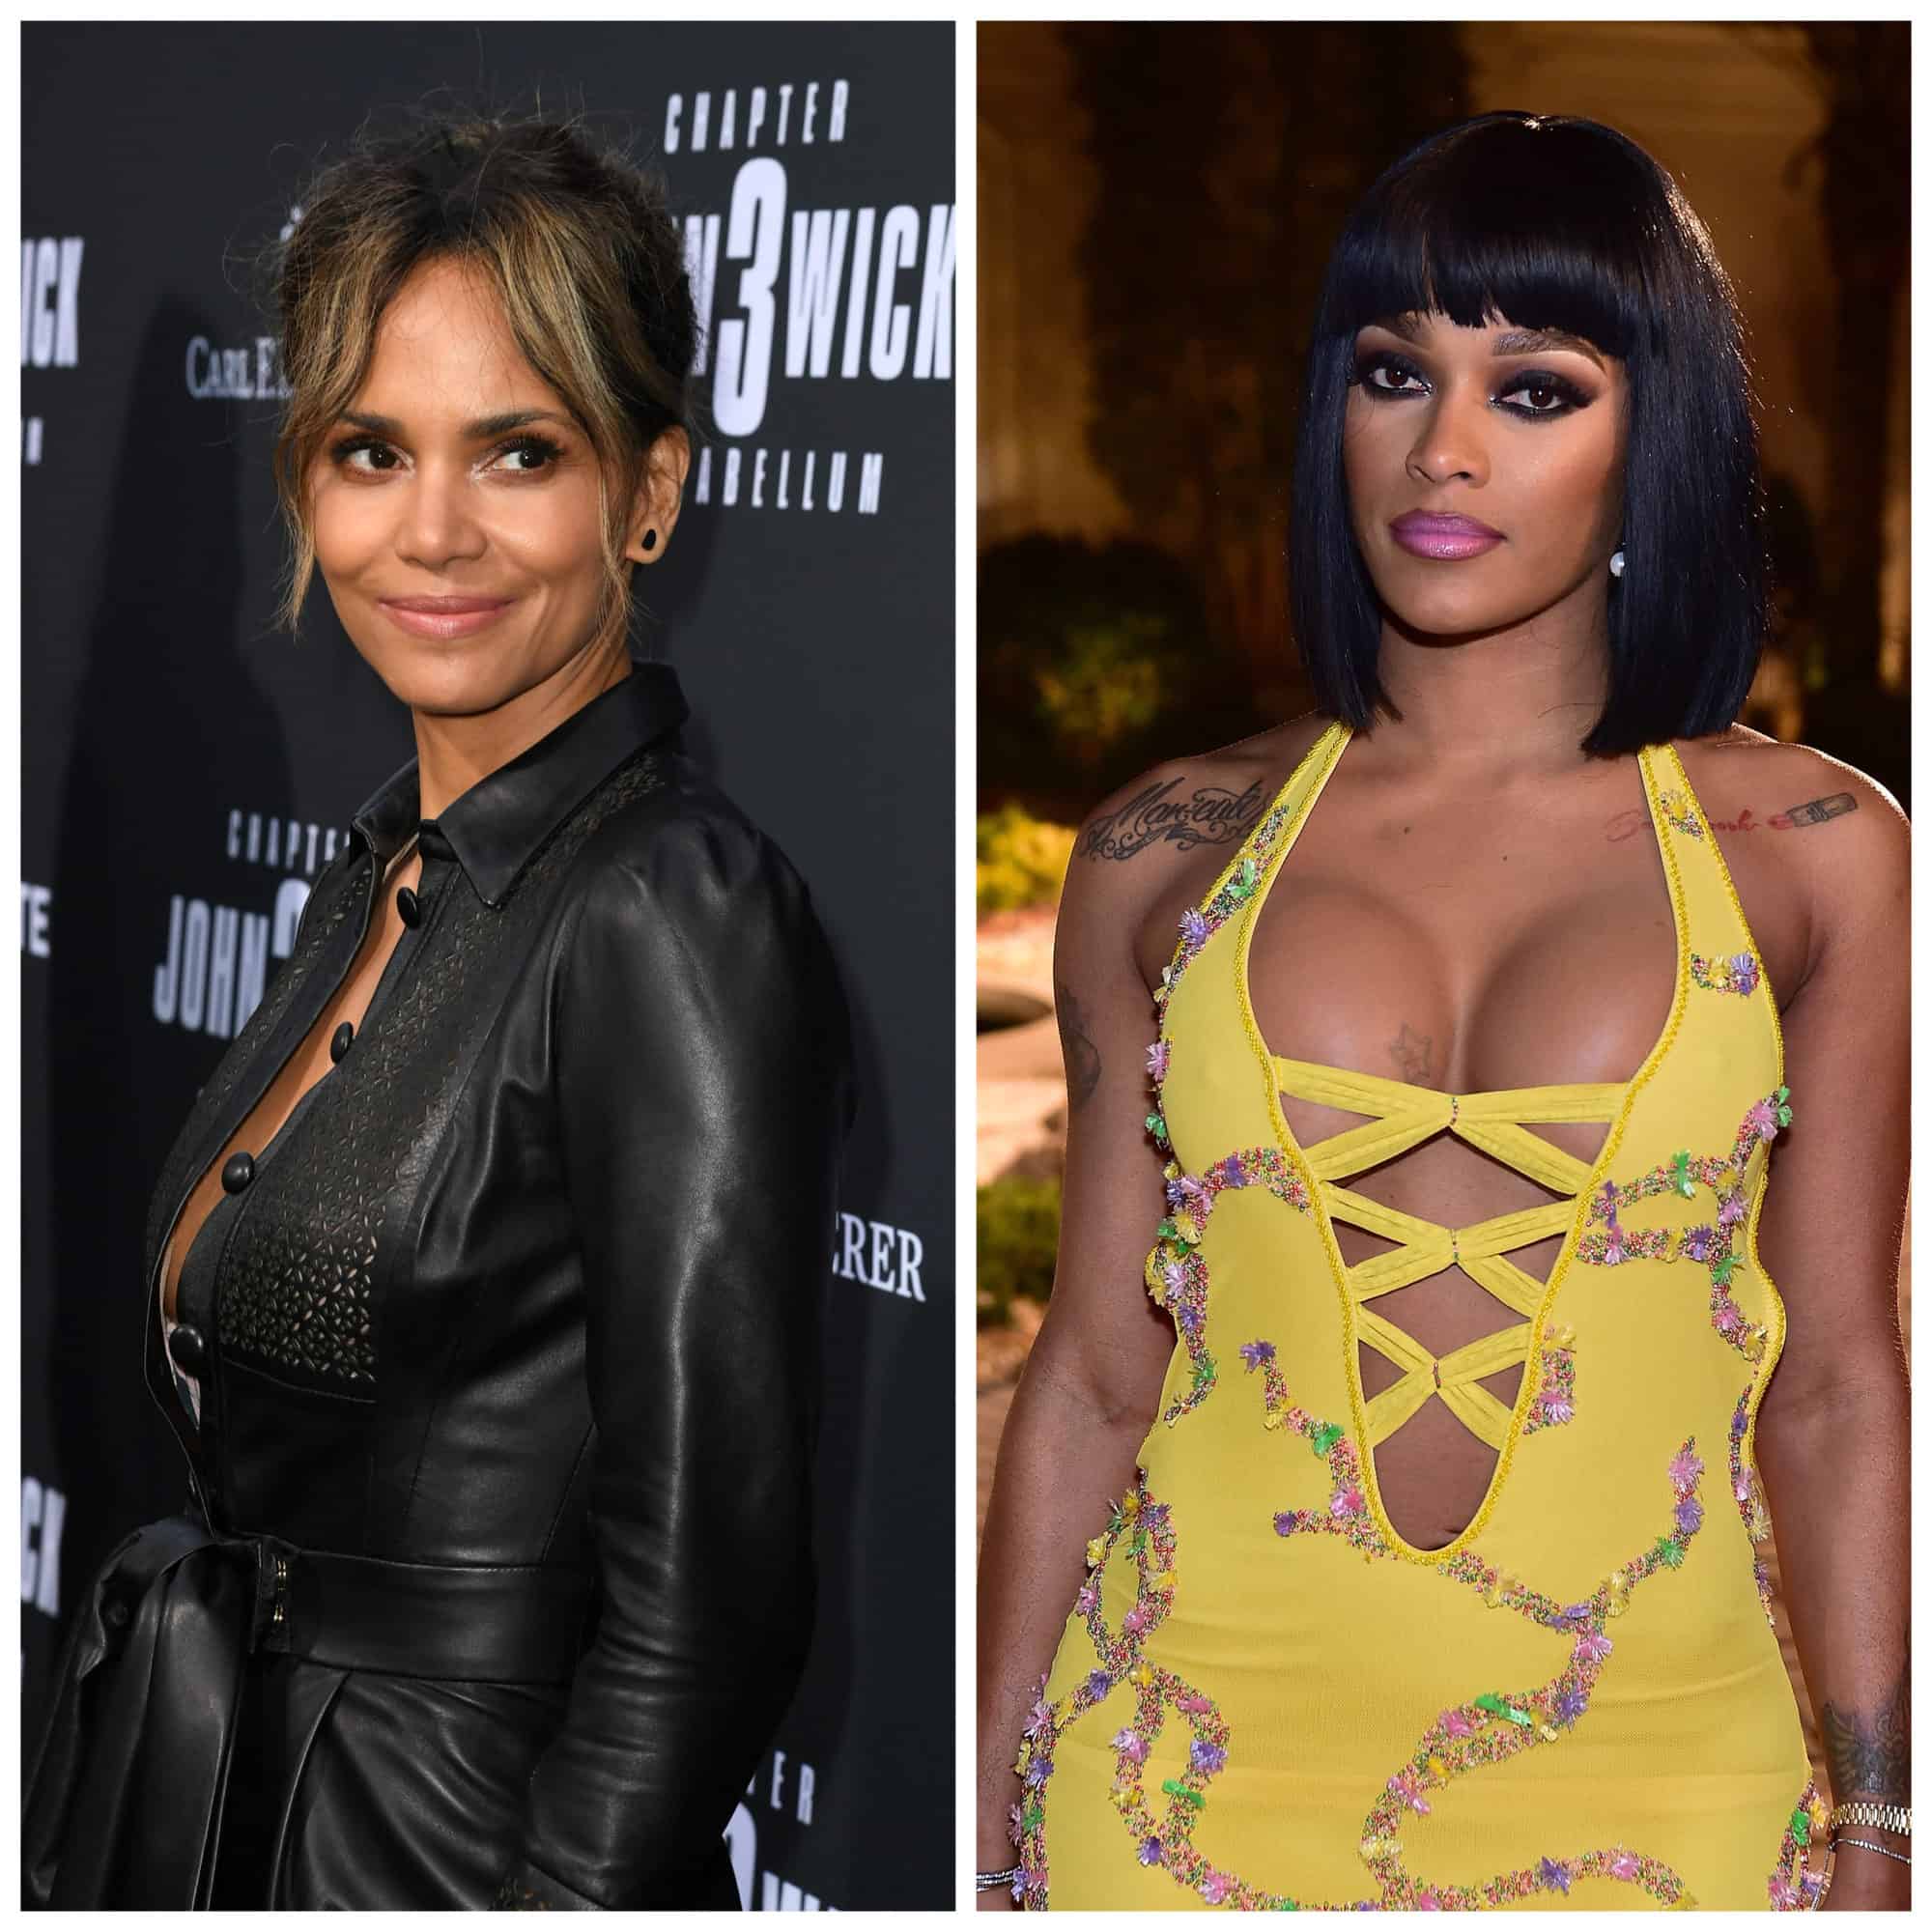 Halle Berry Laughs About Being Compared To Joseline Hernandez In ‘Strictly Business’ Meme